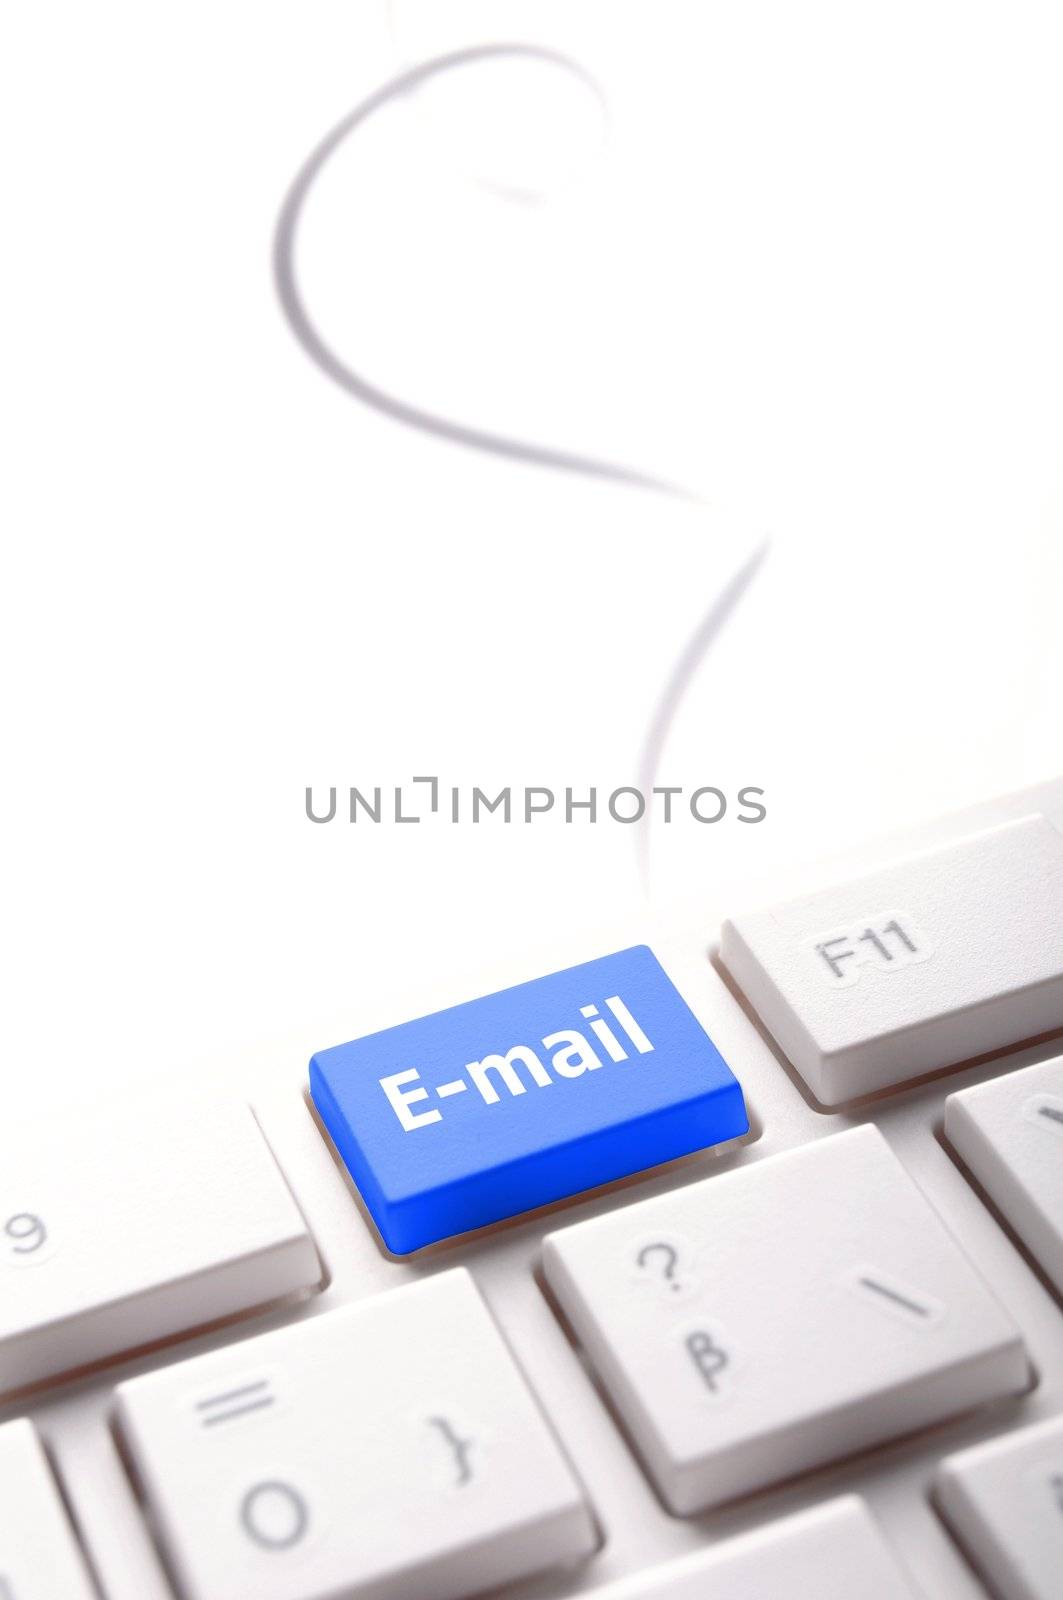 email butten on white keyboard showing communication